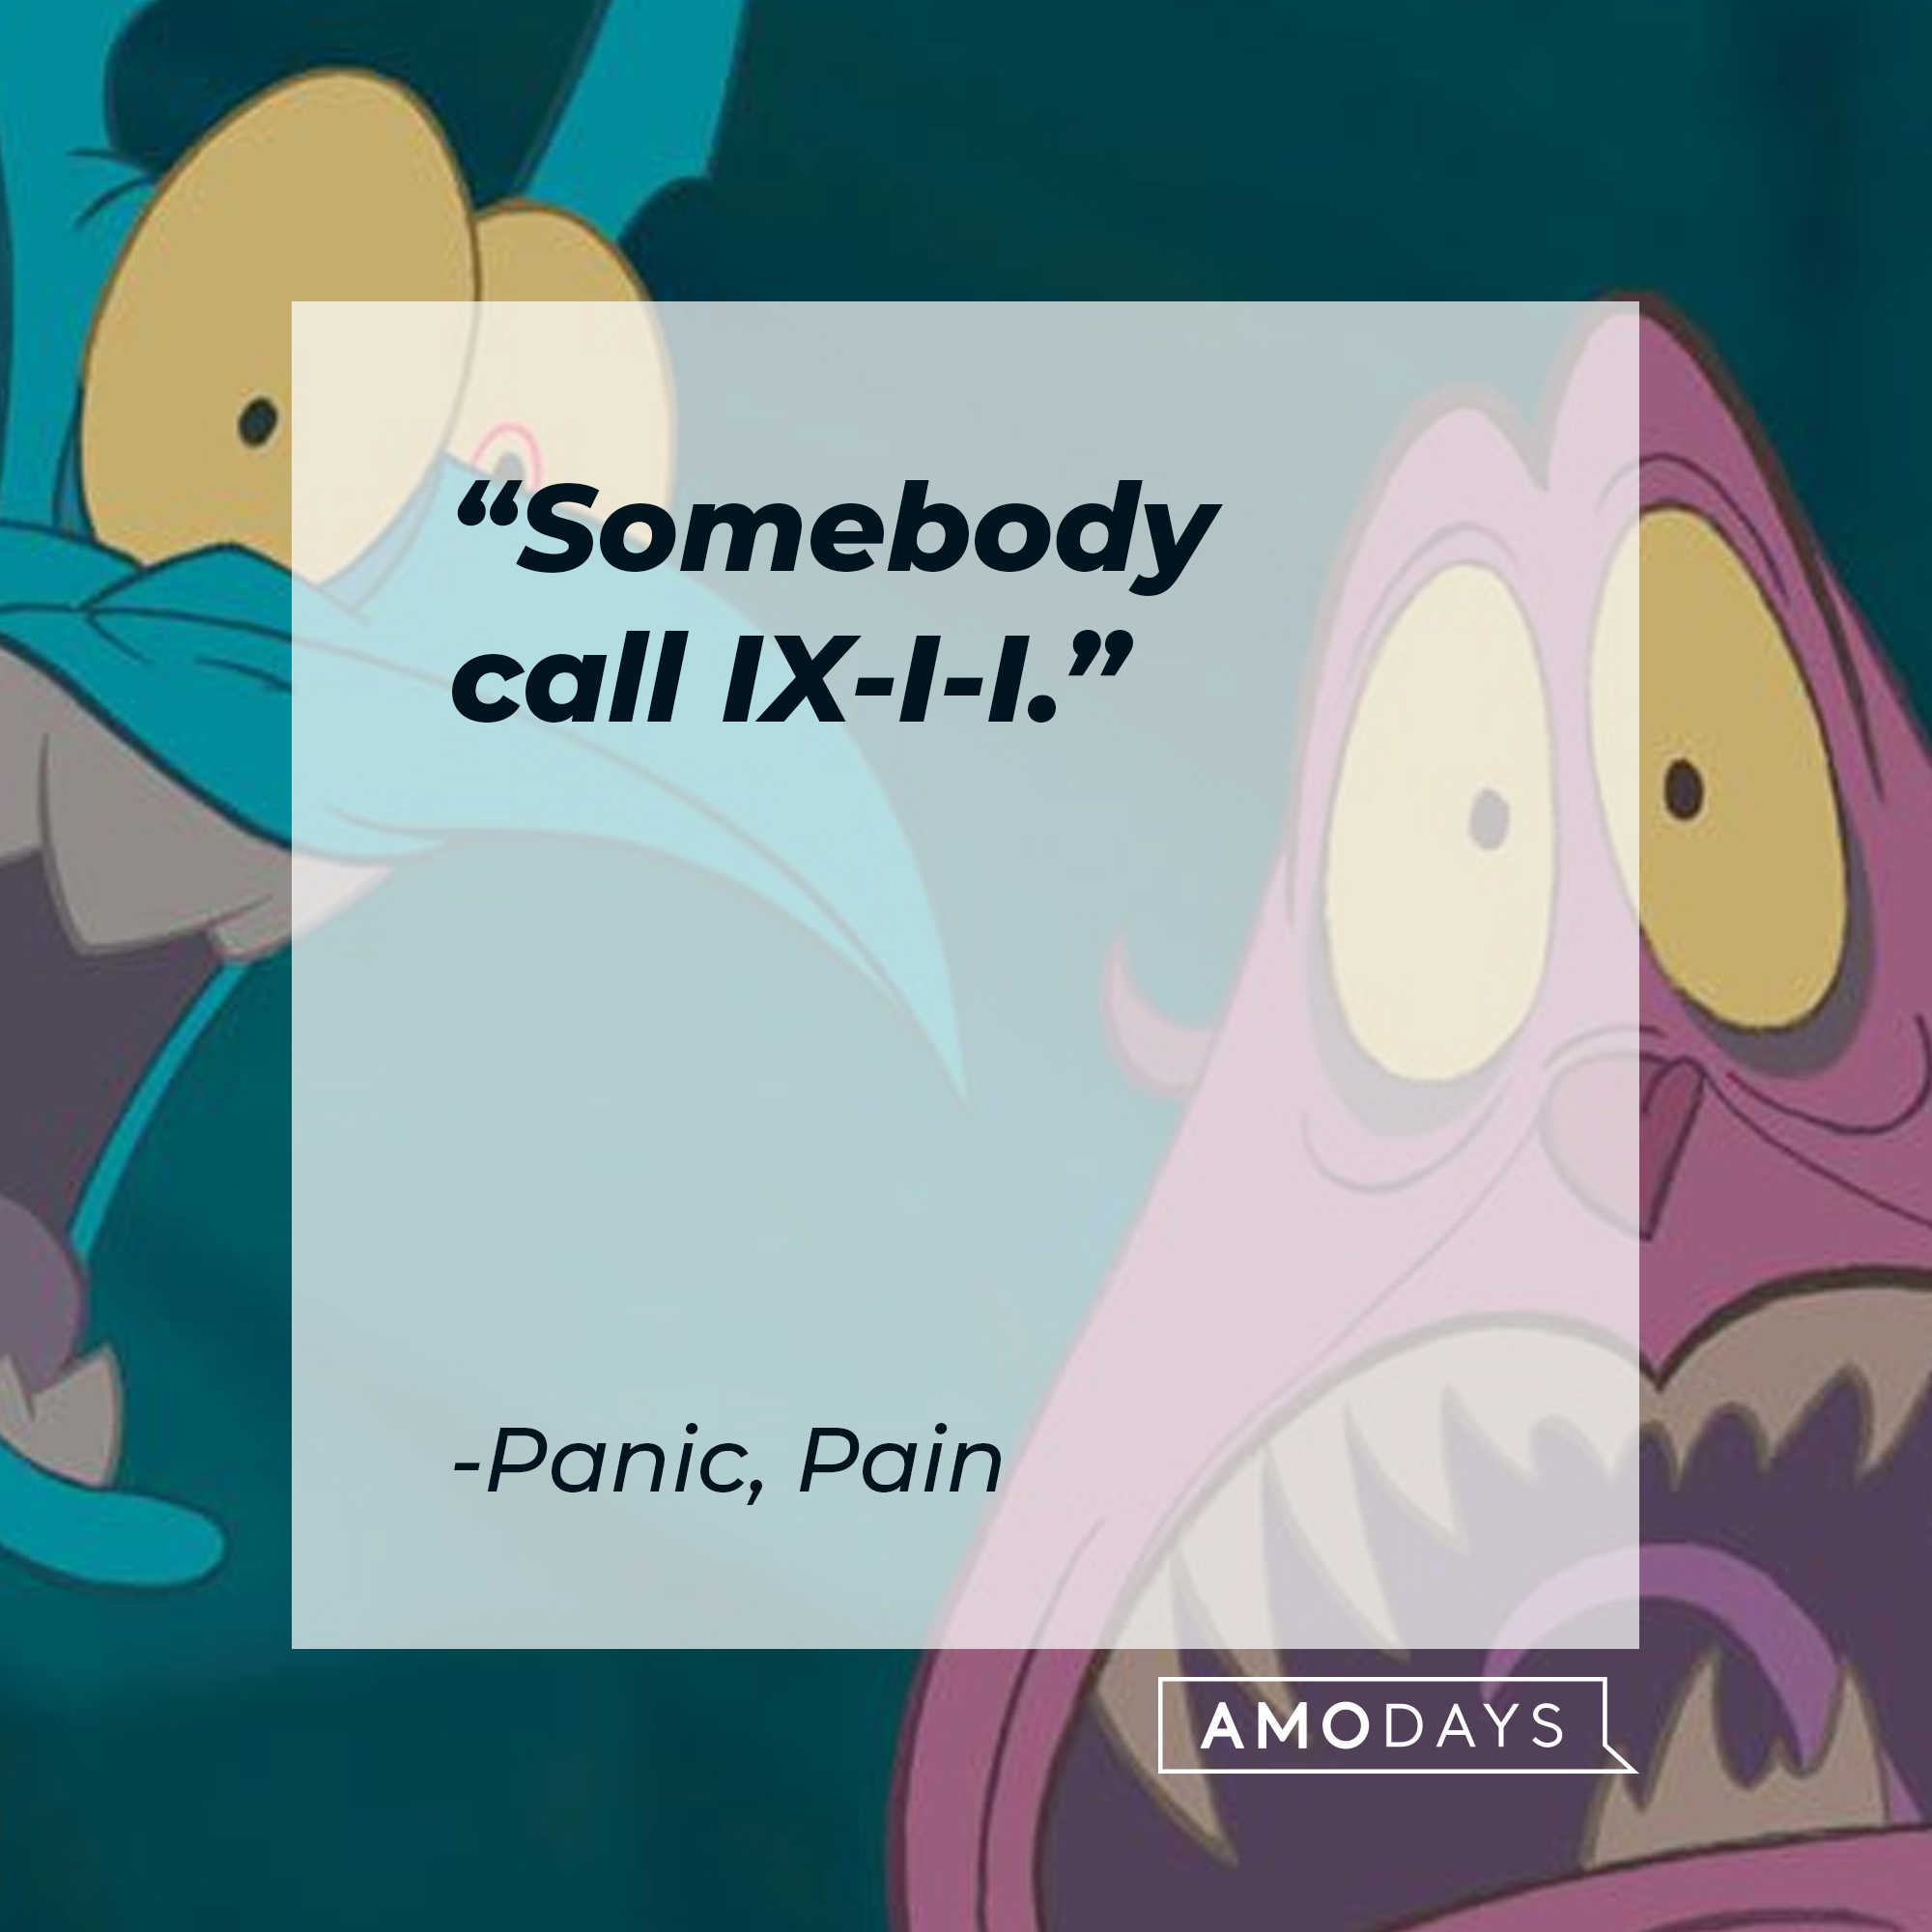 Panic and Pain from the "Hercules" movie with their quote: “Somebody call IX-I-I.” | Source: Facebook.com/DisneyHercules